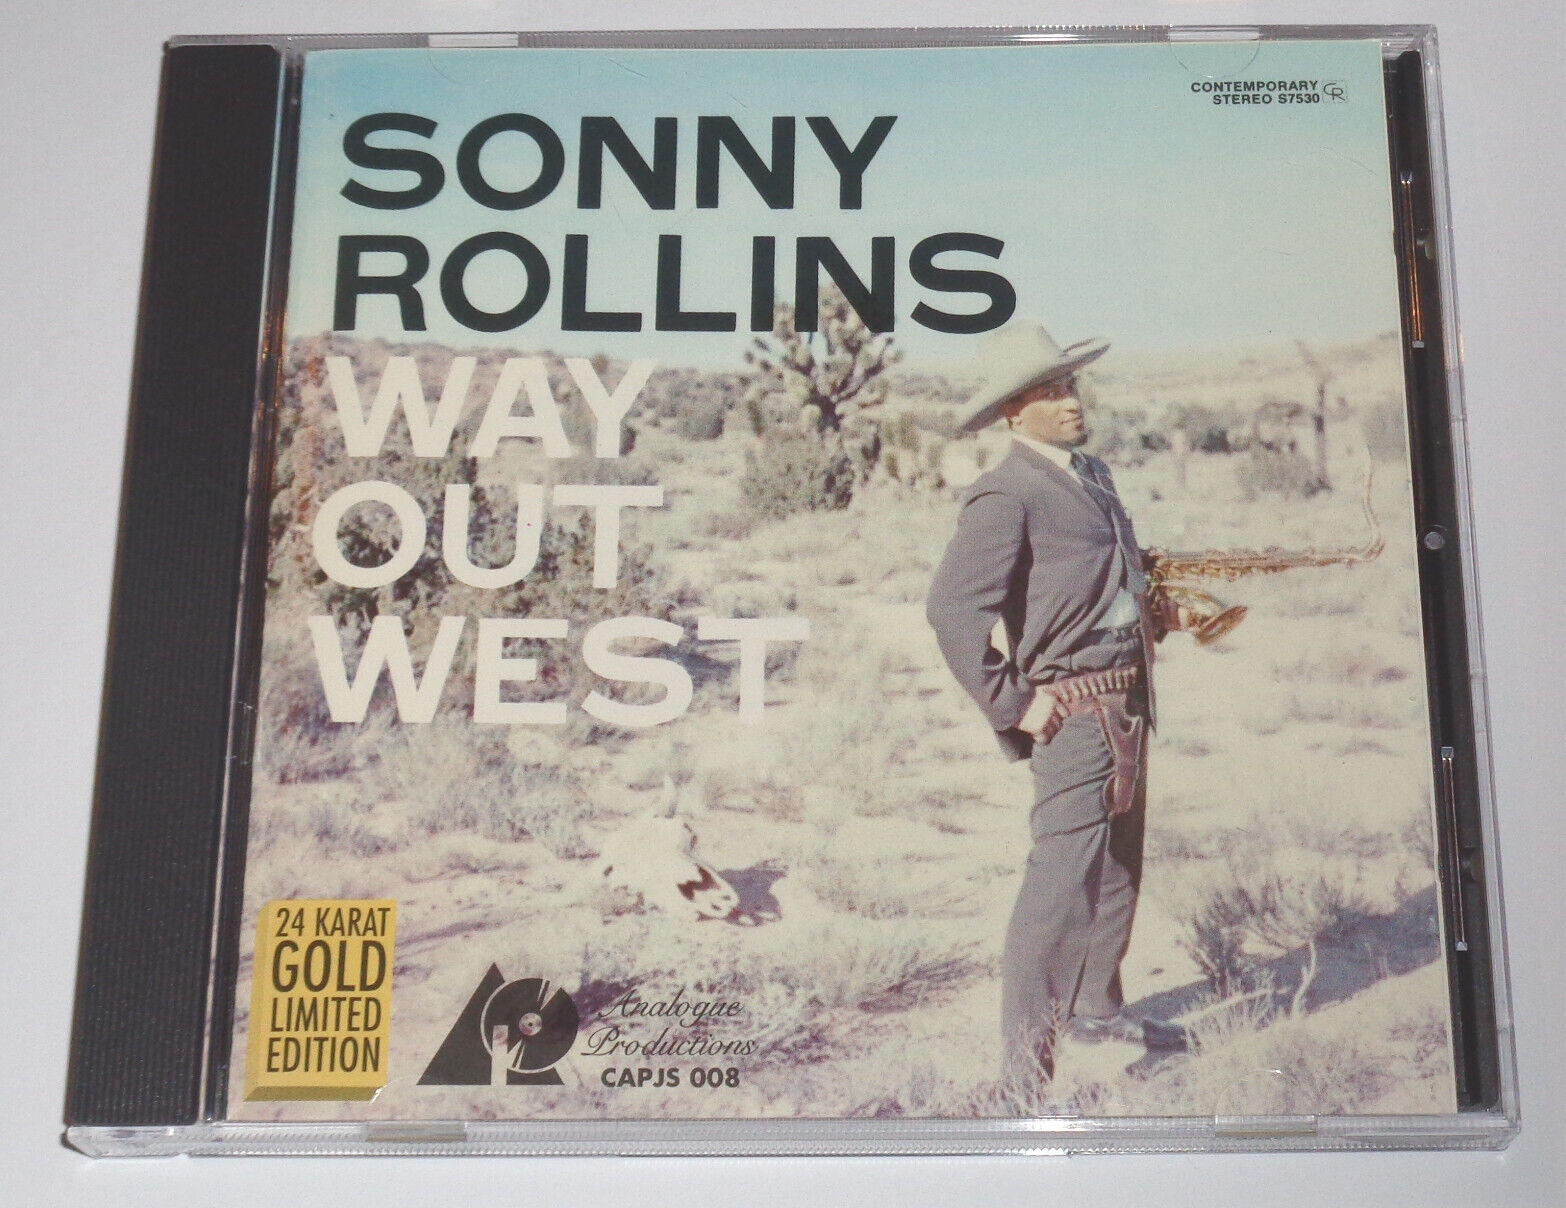 Sonny Rollins Way Out West Gold CD Analogue Productions Doug Sax Mastering